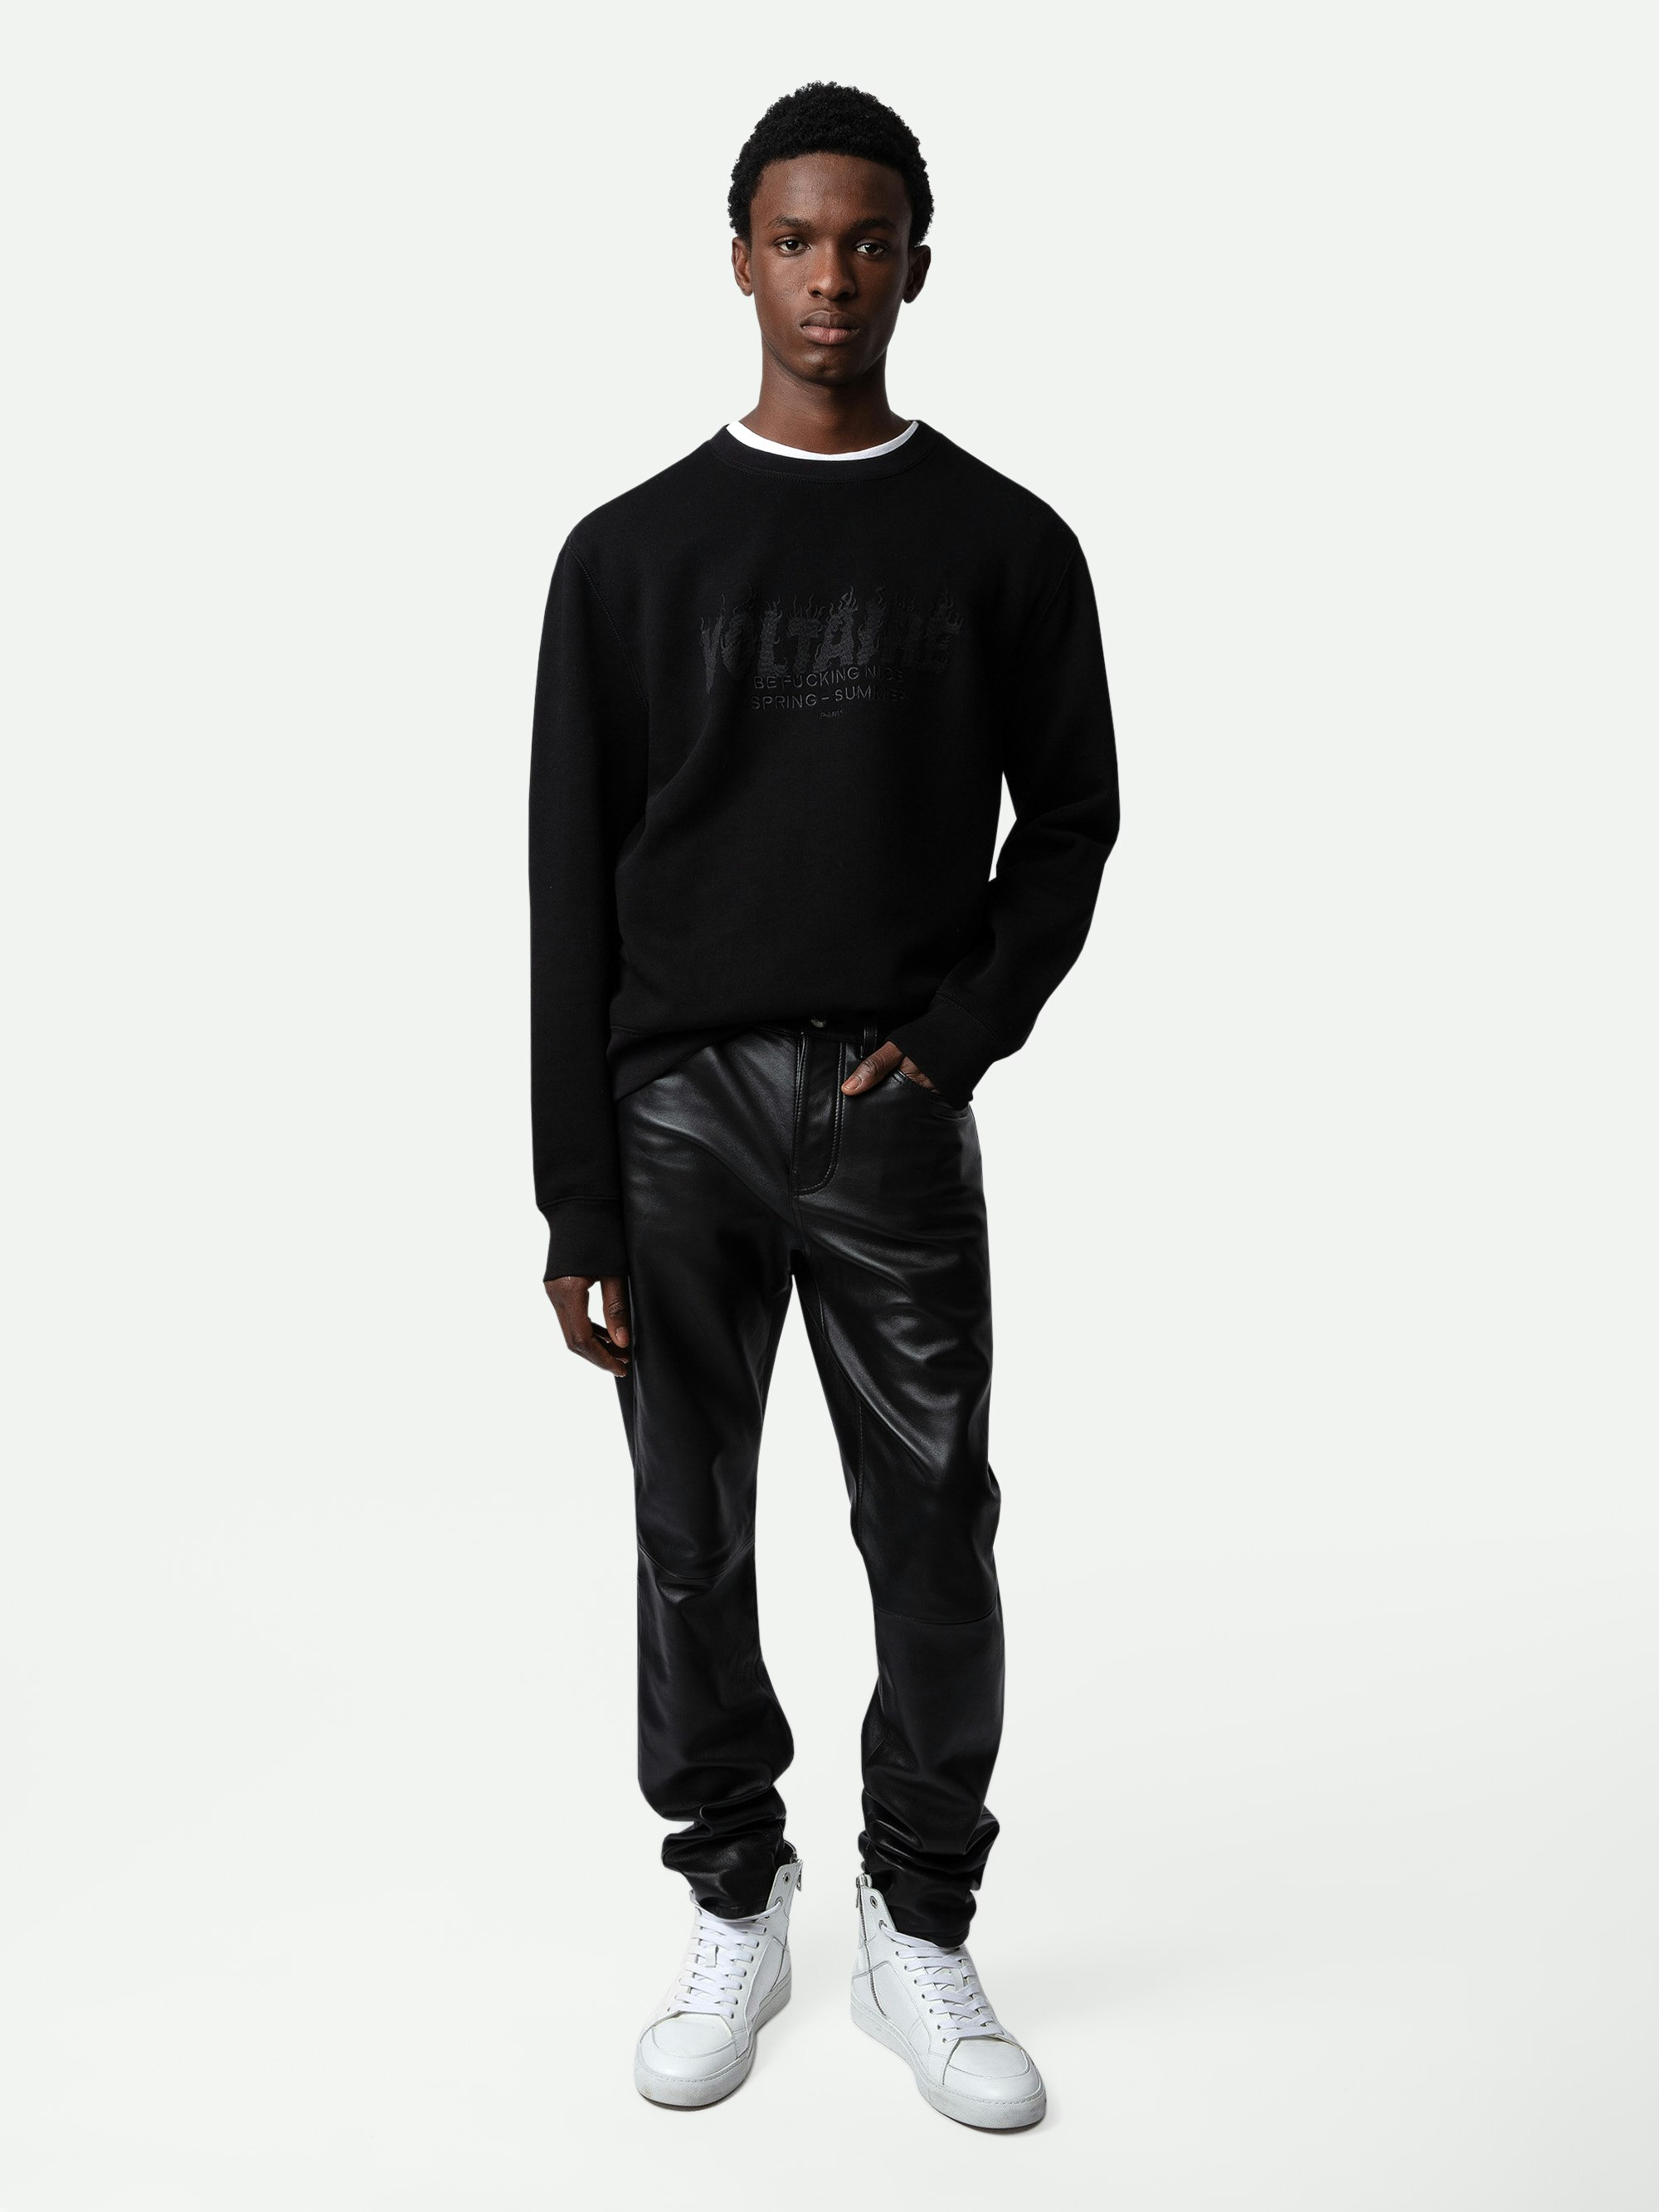 All Men's Clothing | Zadig&Voltaire